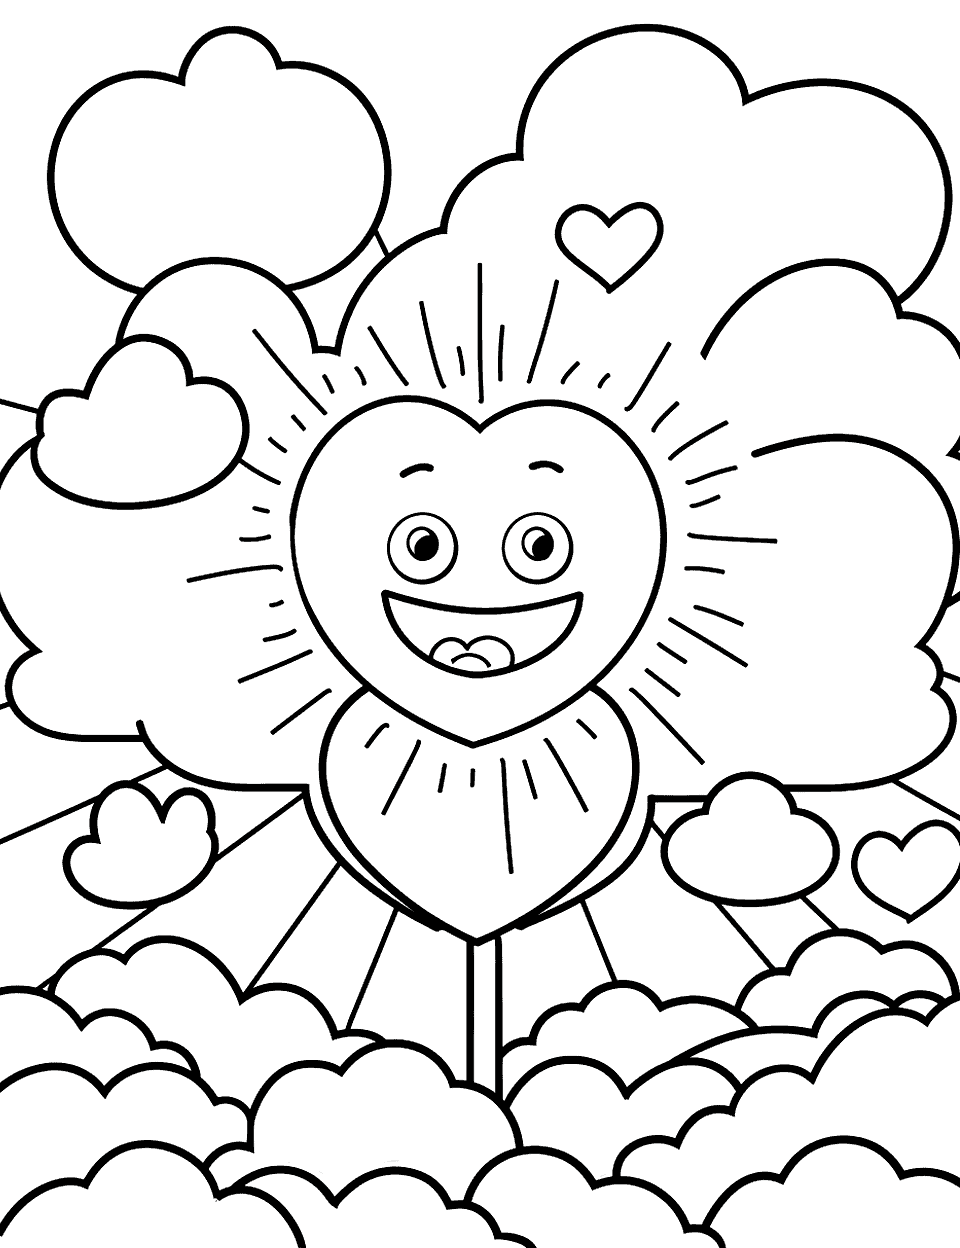 Heart in the Clouds Shapes Coloring Page - A sky scene with clouds and a big shining sun in the shape of a heart.